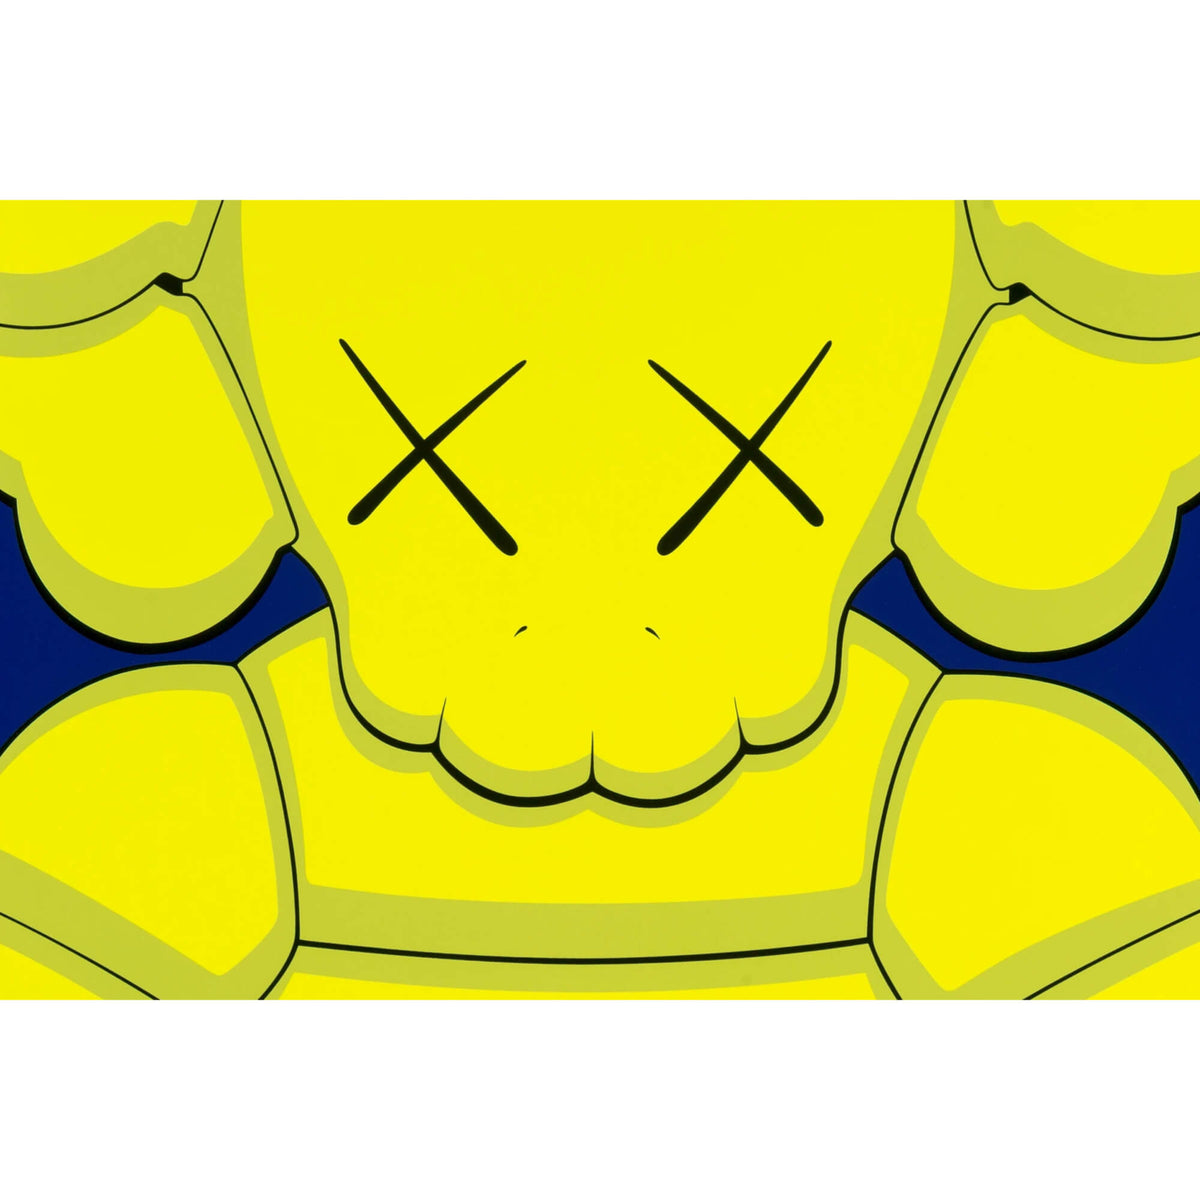 KAWS's What Party Yellow On Blue Print   Hype Museum